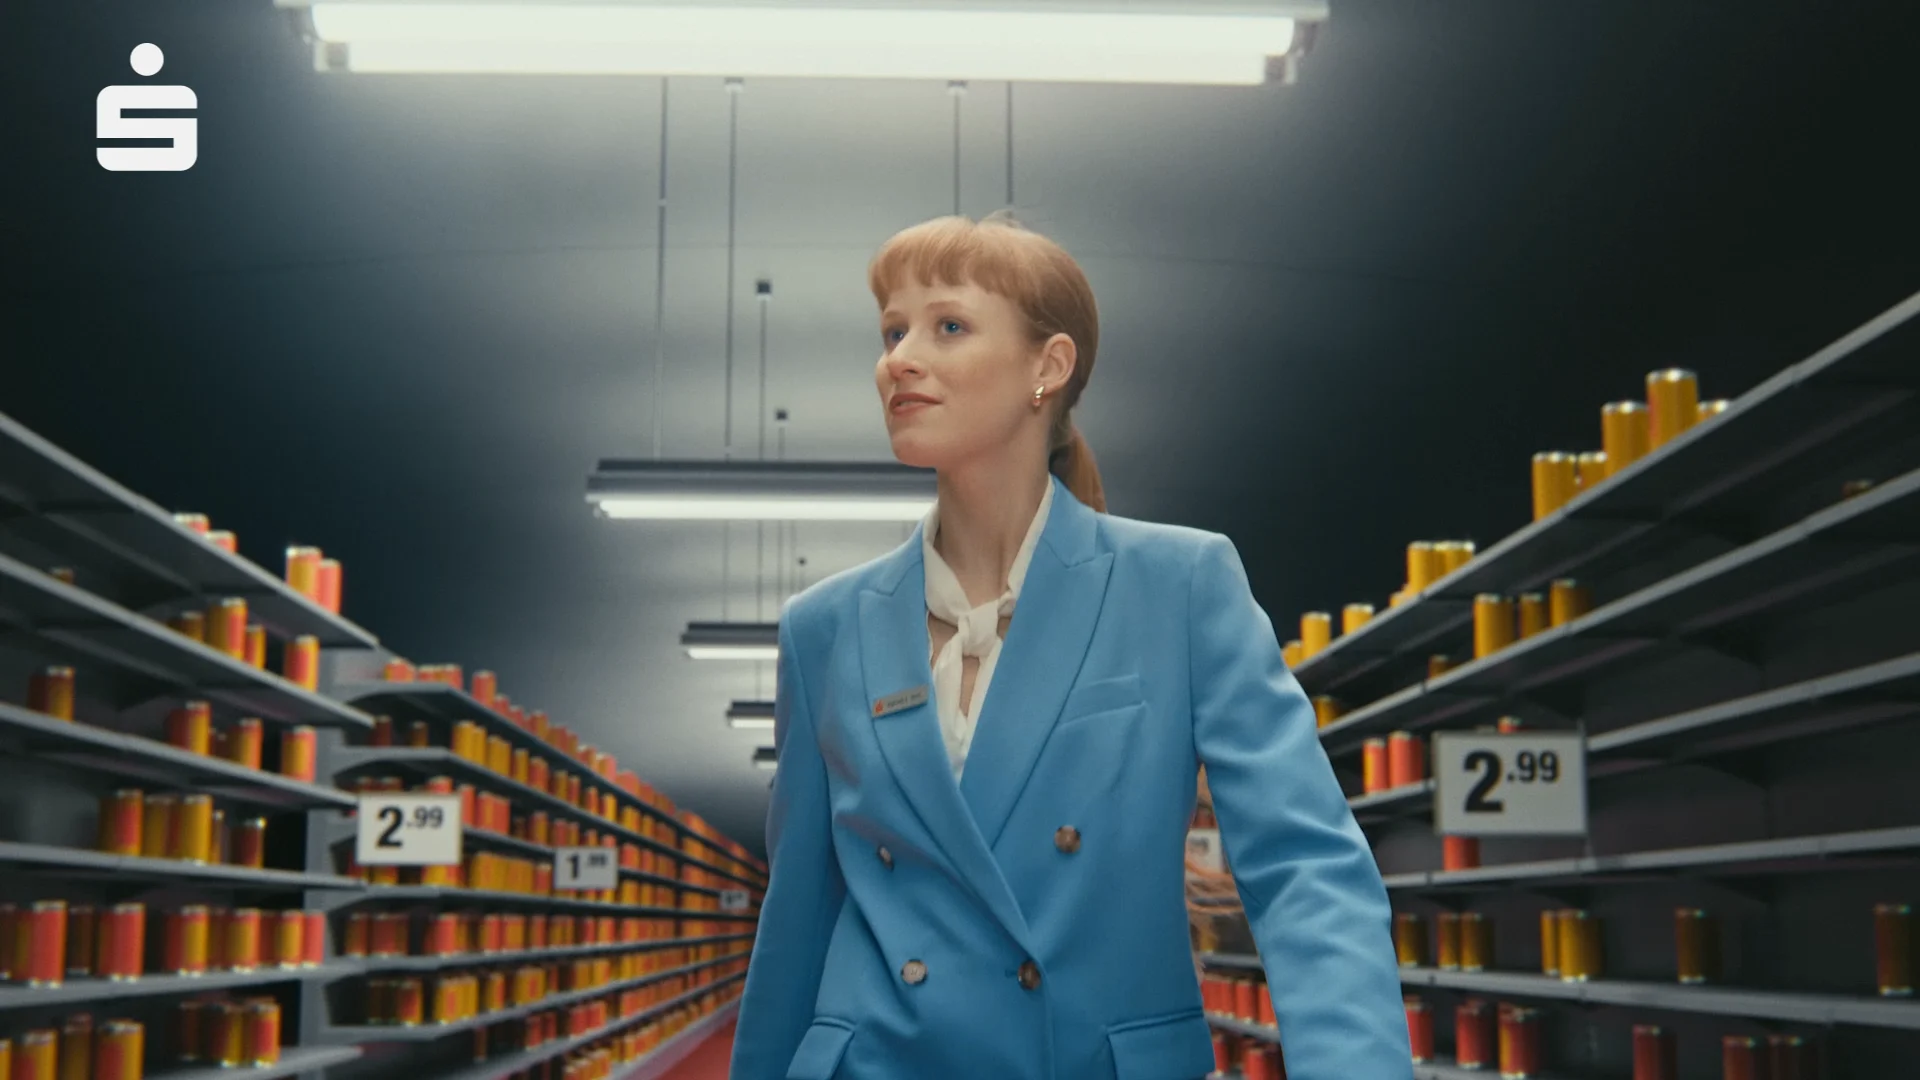 a woman walking between two shelves in a super markes. in both shelves there are red and orange cans and price tags